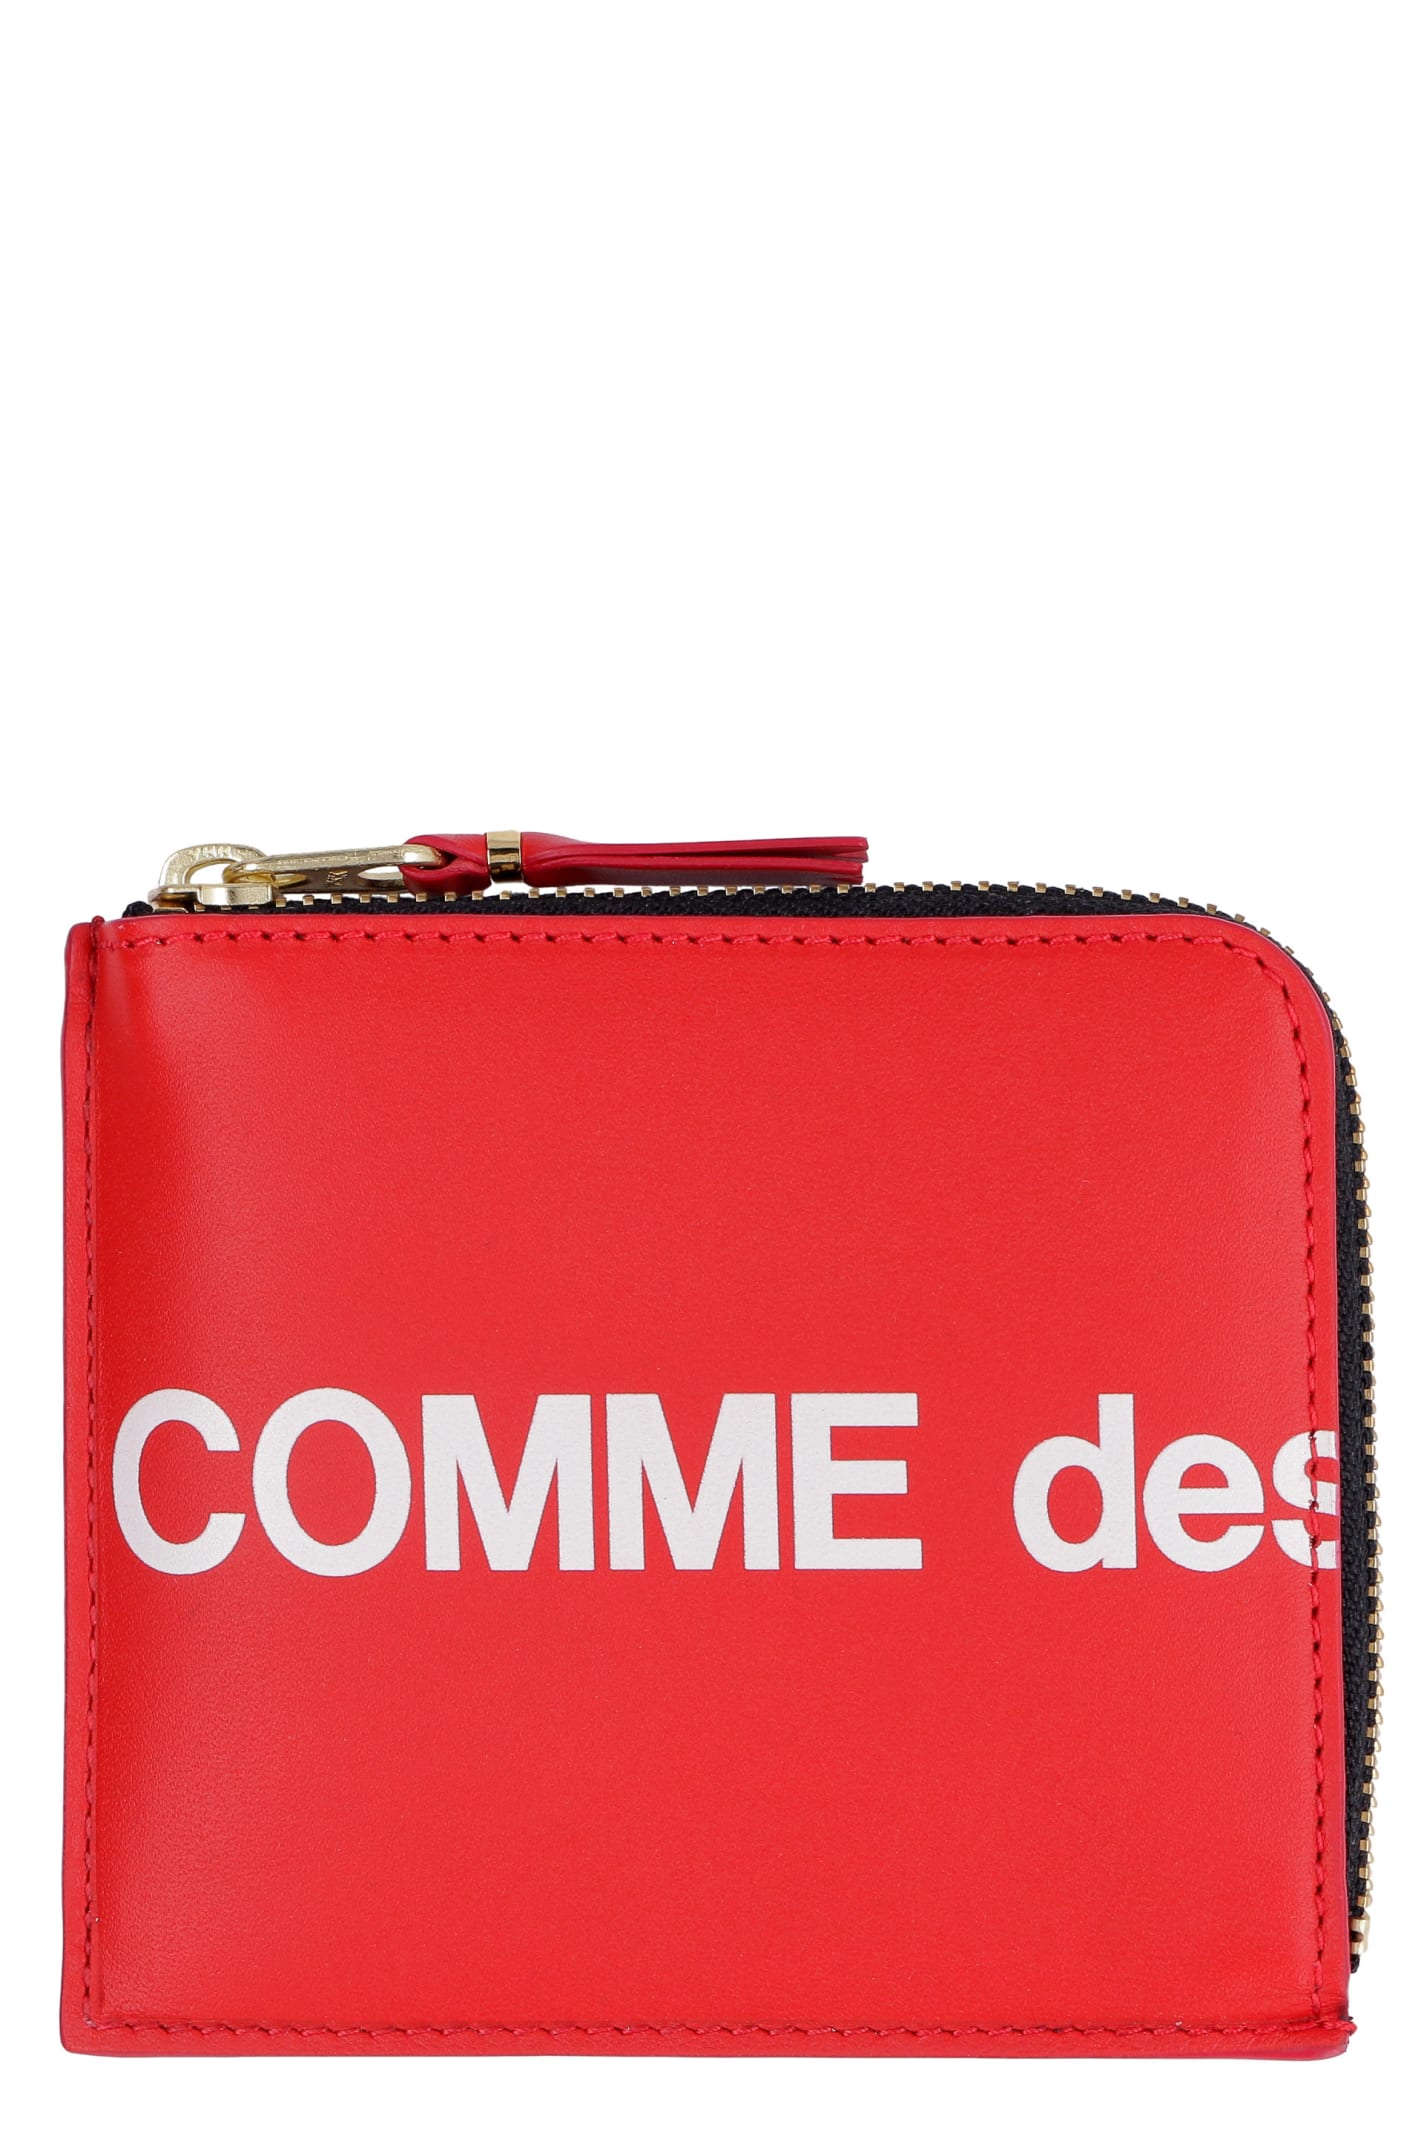 Comme Des Garçons Leather Zipped Coin Purse In Red | ModeSens